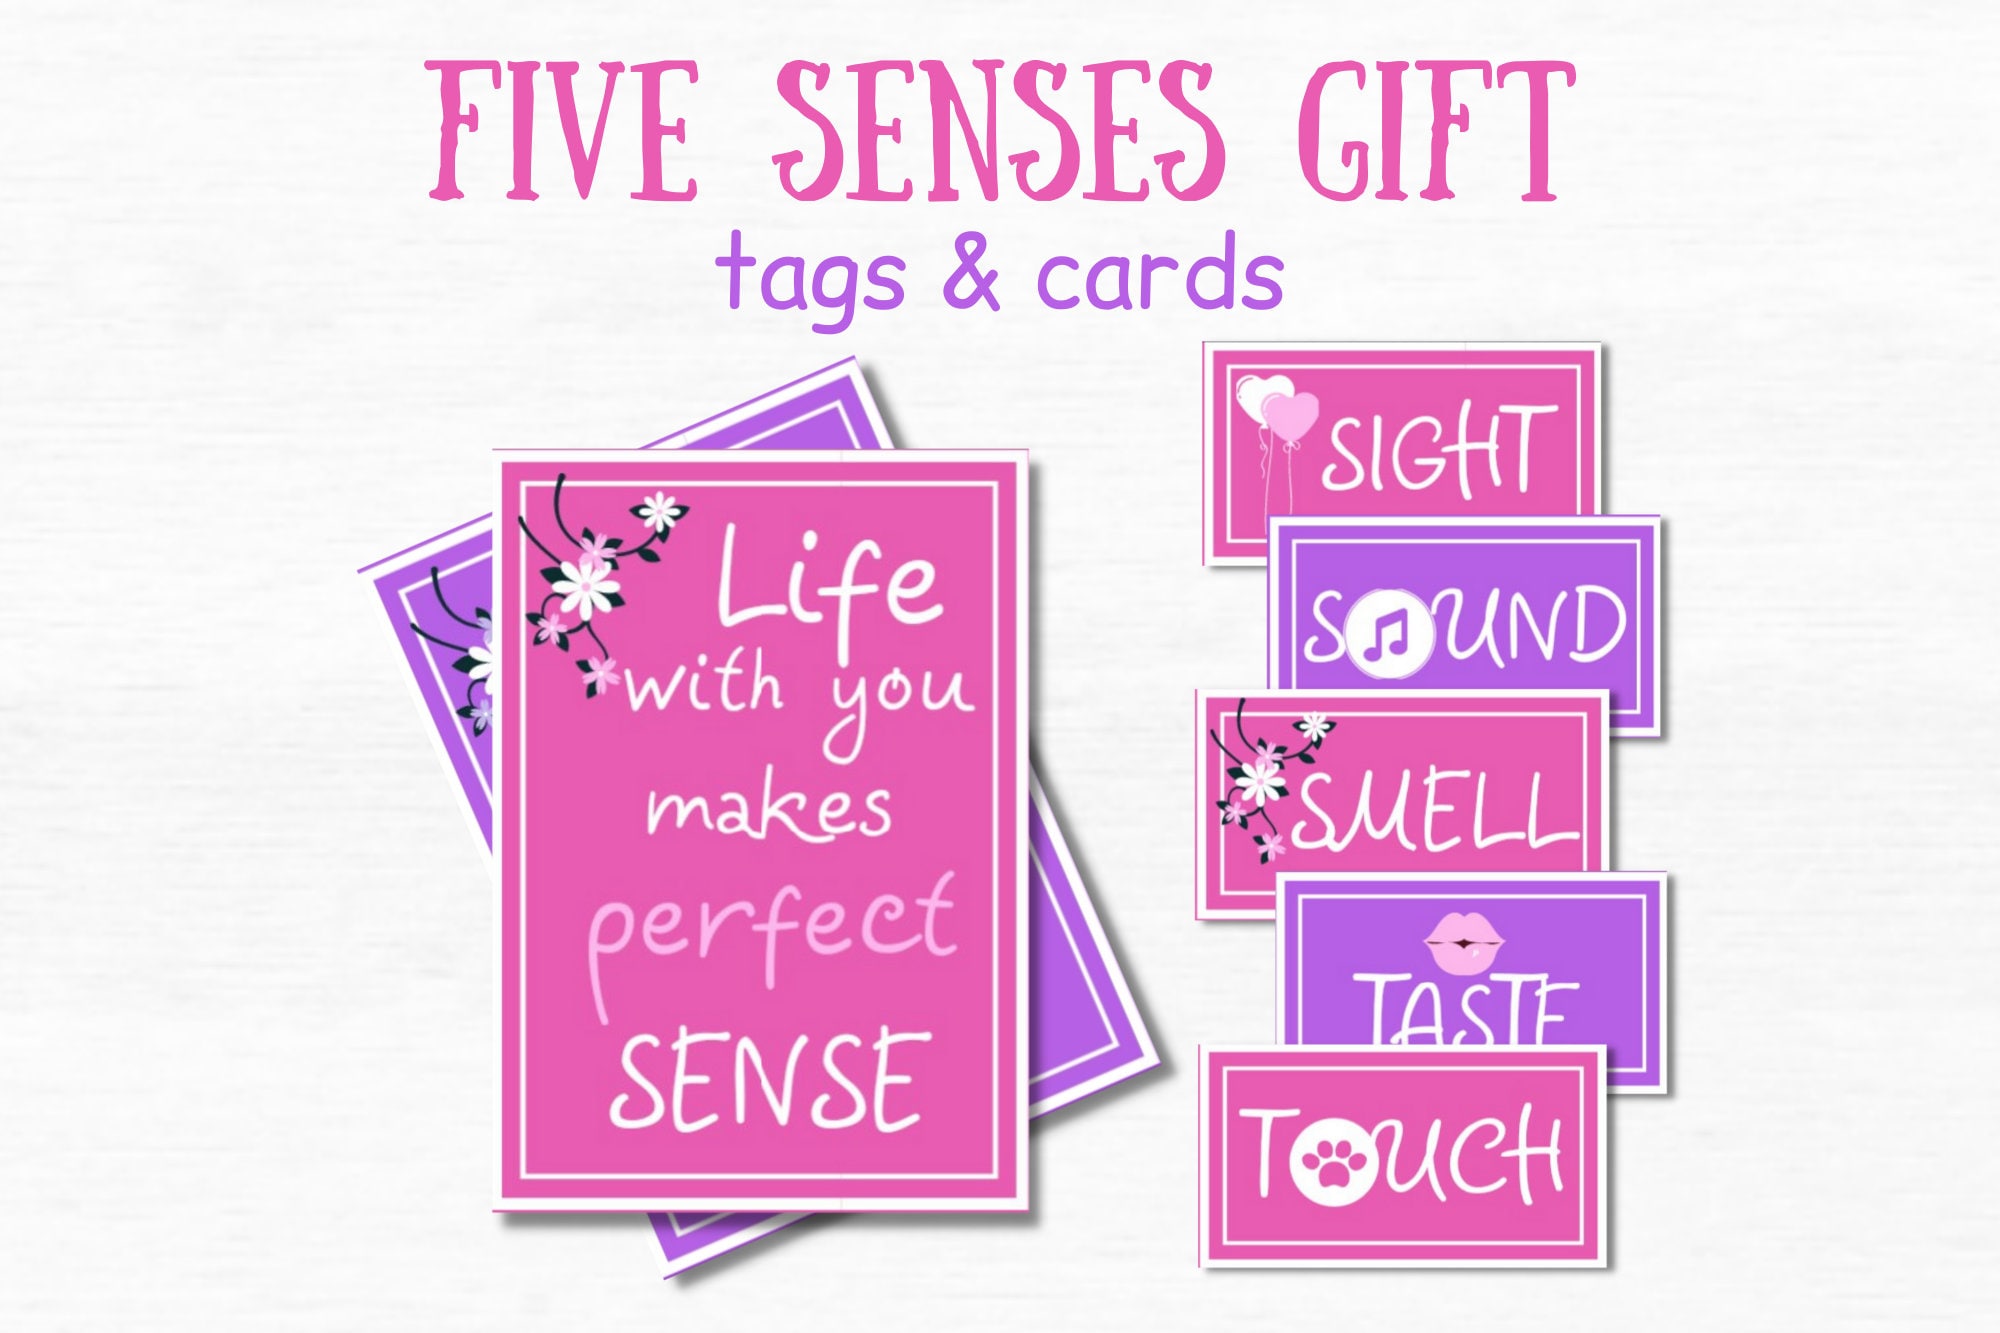 5 Senses Gift Tags One Year Anniversary Gifts for Boyfriend -    Romantic gifts for him, Boyfriend anniversary gifts, Boyfriend gifts